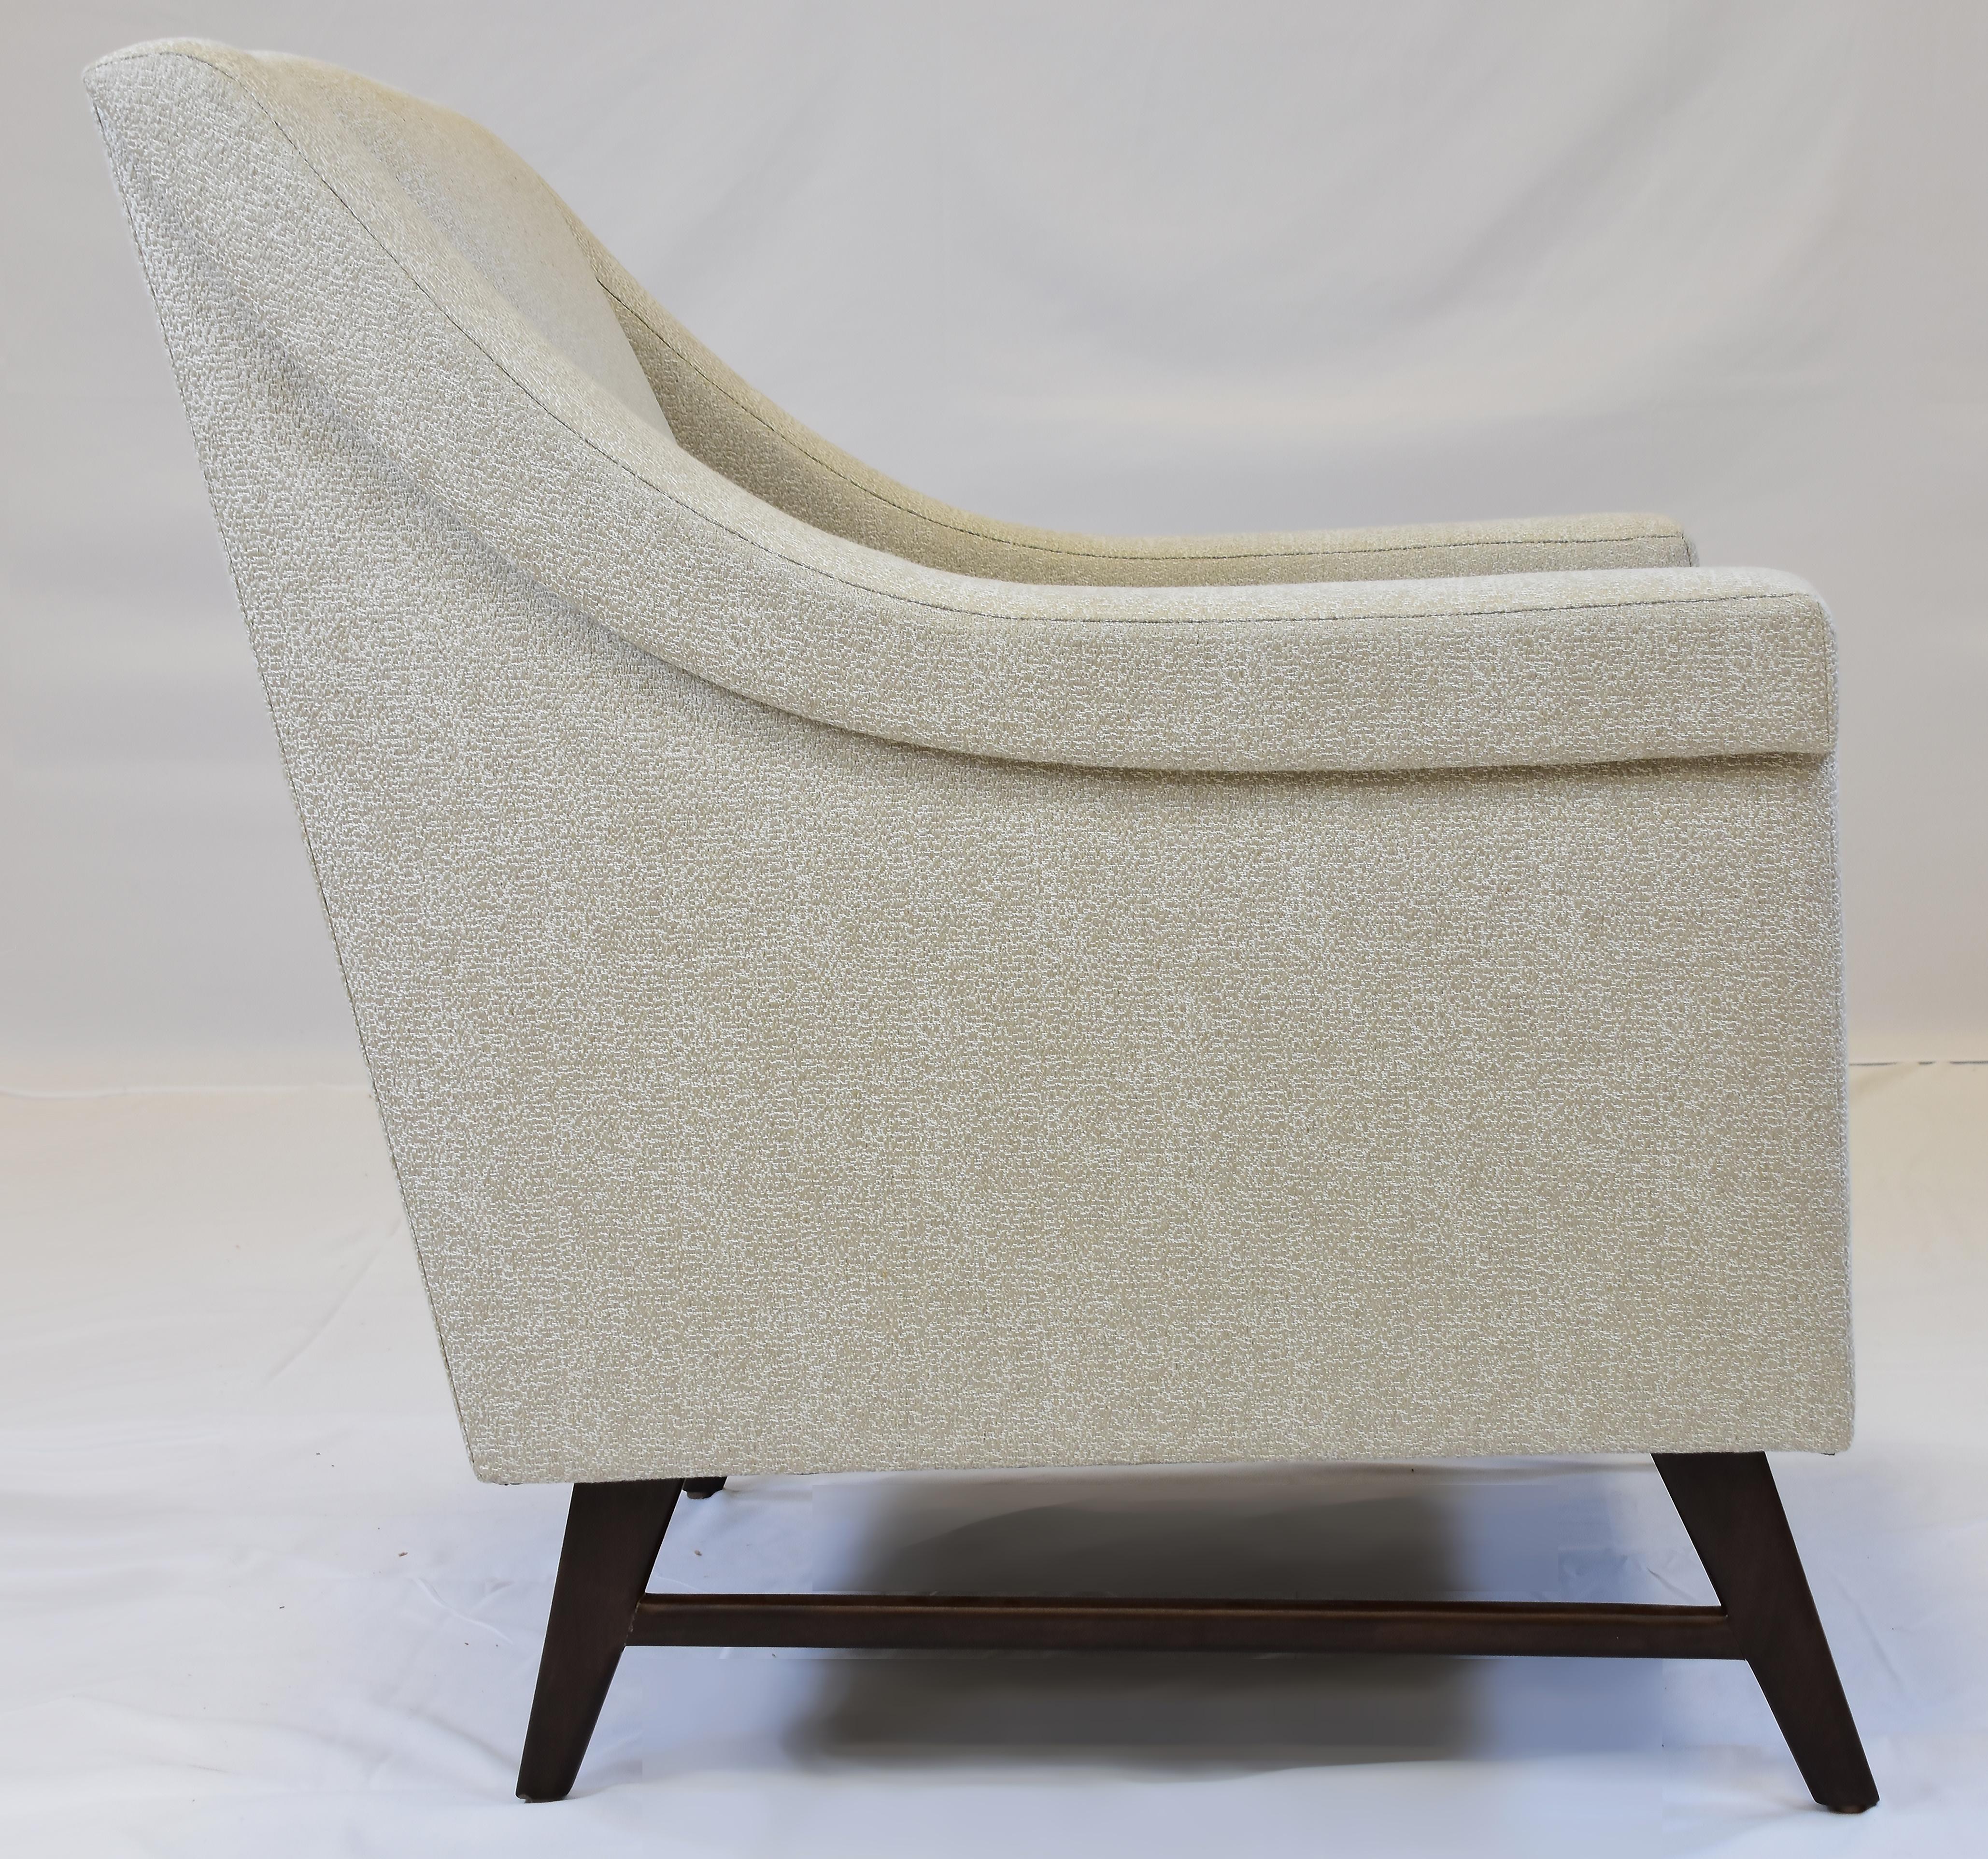 Le Jeune Upholstery Hansen Lounge Chair Showroom Model

Offered for sale is a Le Jeune Upholstery HANSEN Mid-century Modern style C4.923 showroom model chair.  The chair is medium scaled with a tight back and loose seat cushion and has a very